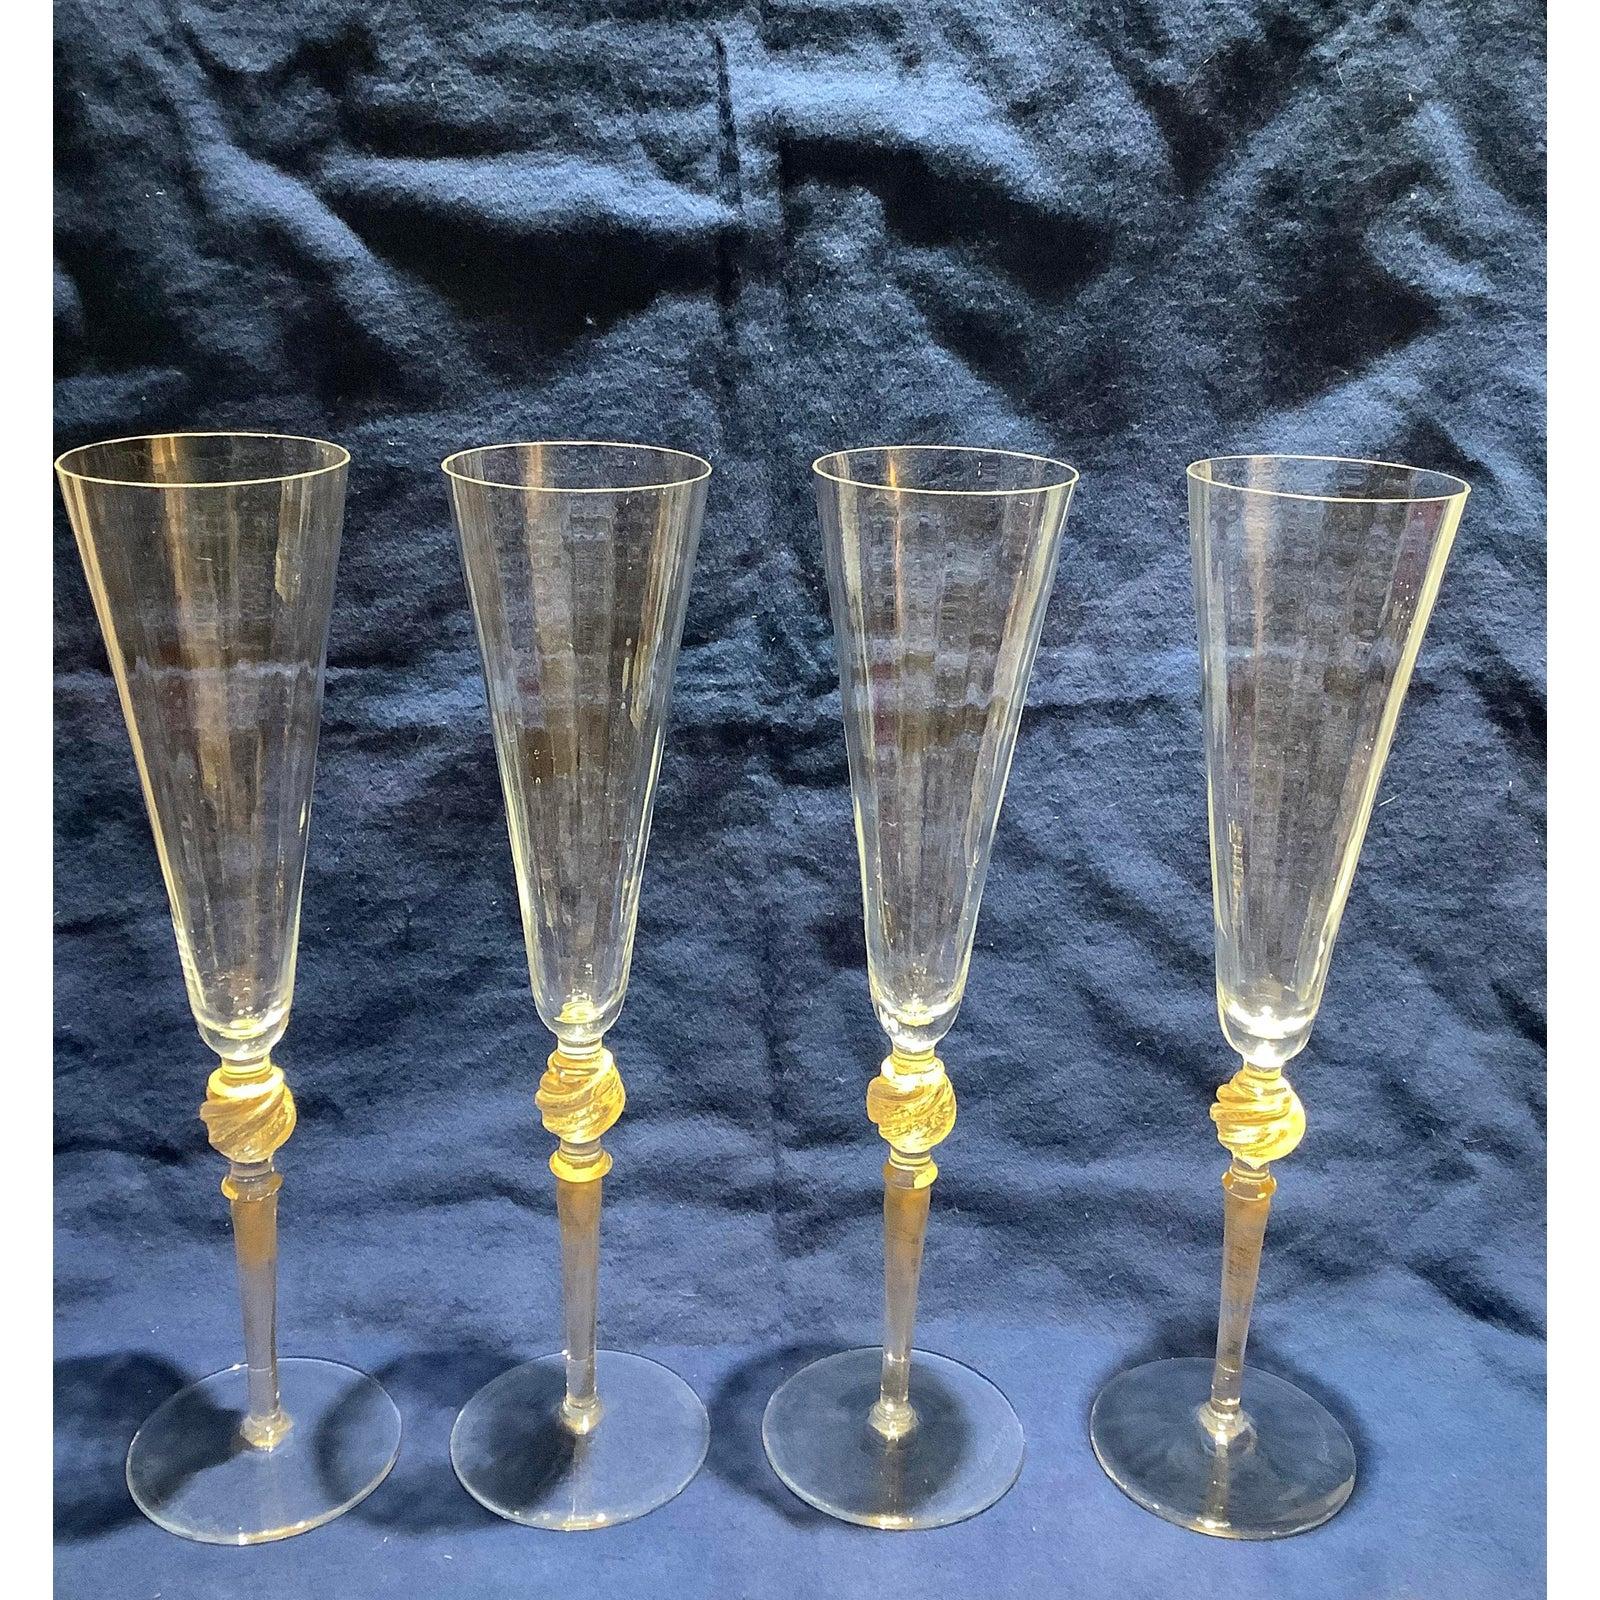 Set of 4 custom murano glass champagne flutes from the 1970s. These are clear glass with a lot of 24-karat gold flakes. The clear glass is smooth on the outside and rippled on the inside.
These are still being produced as 10 inch high flutes and